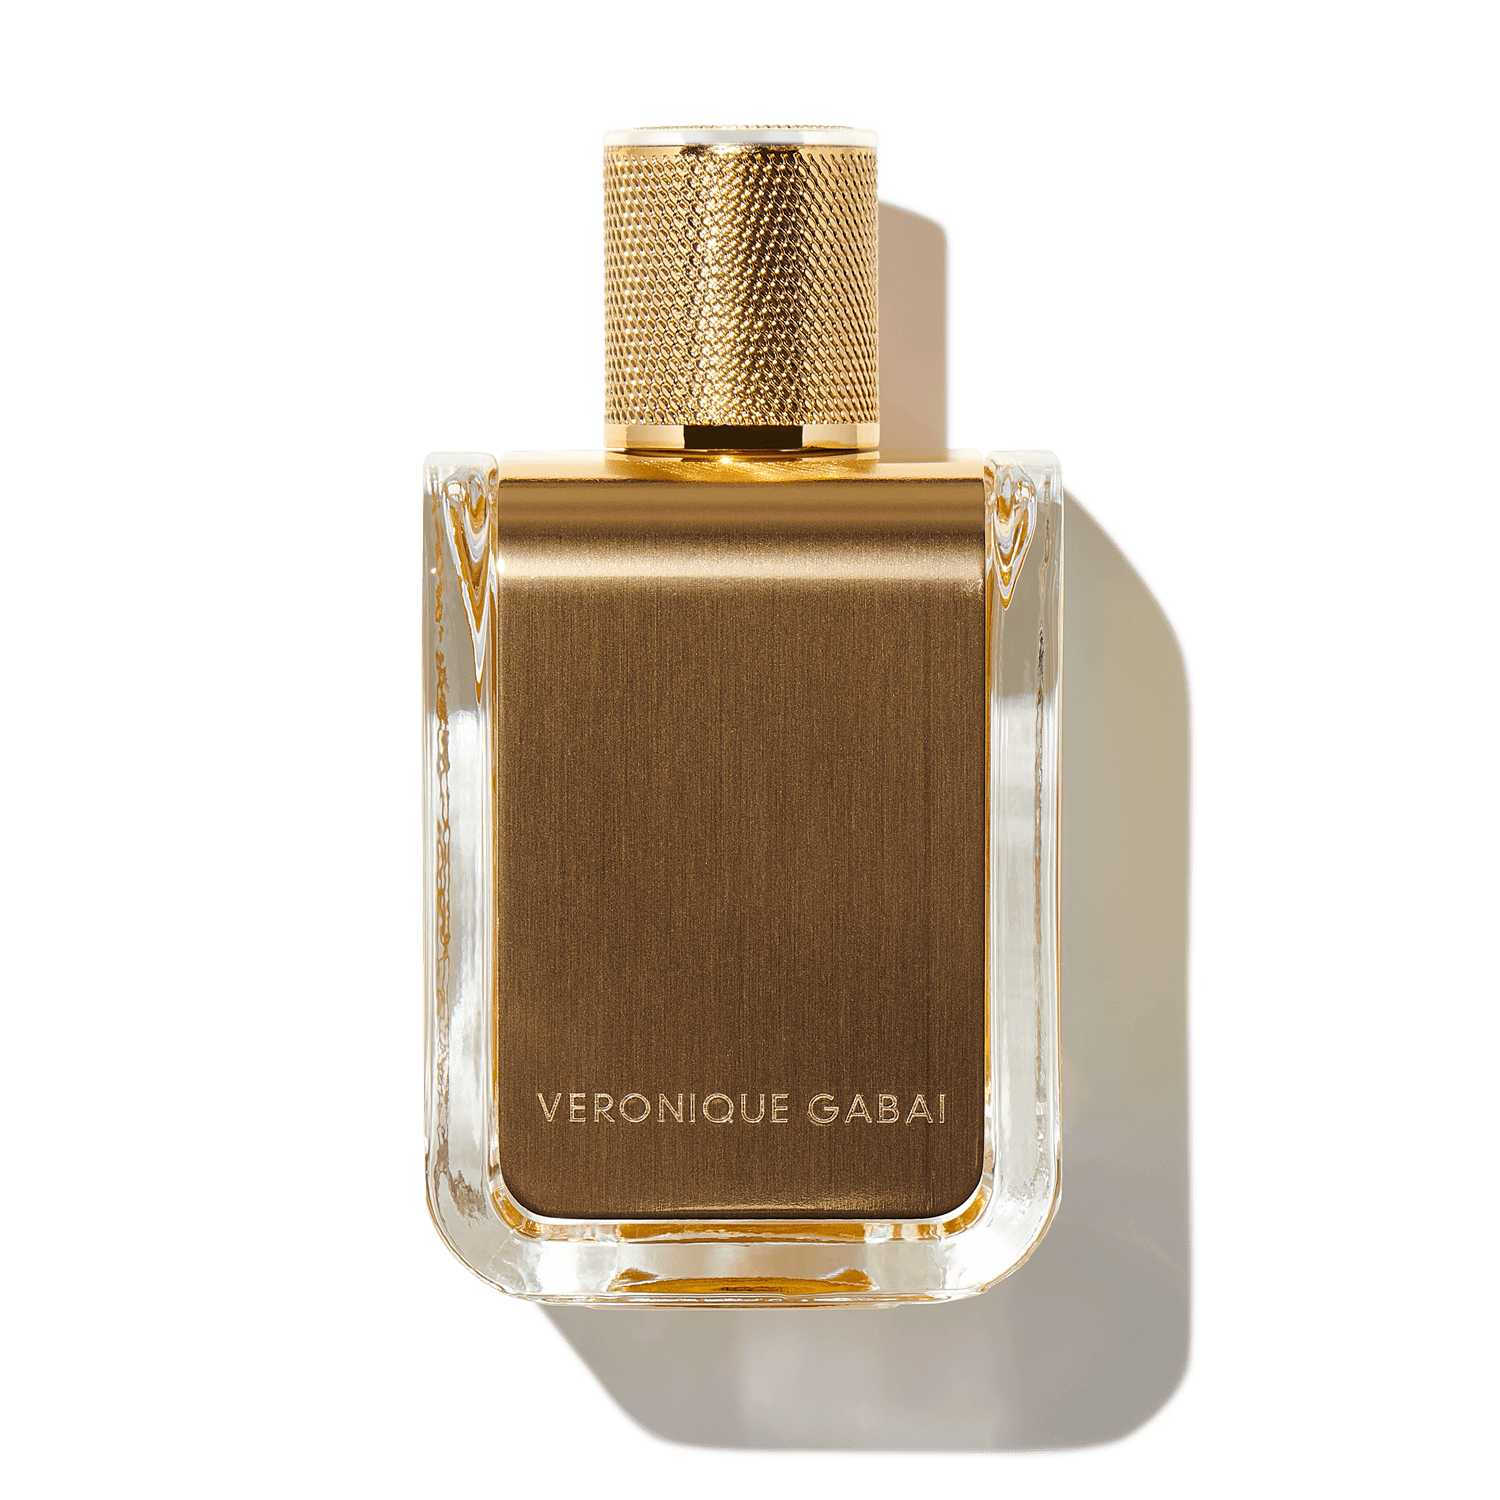 Score VINCE CAMUTO Ciao at Scentbird for $16.95